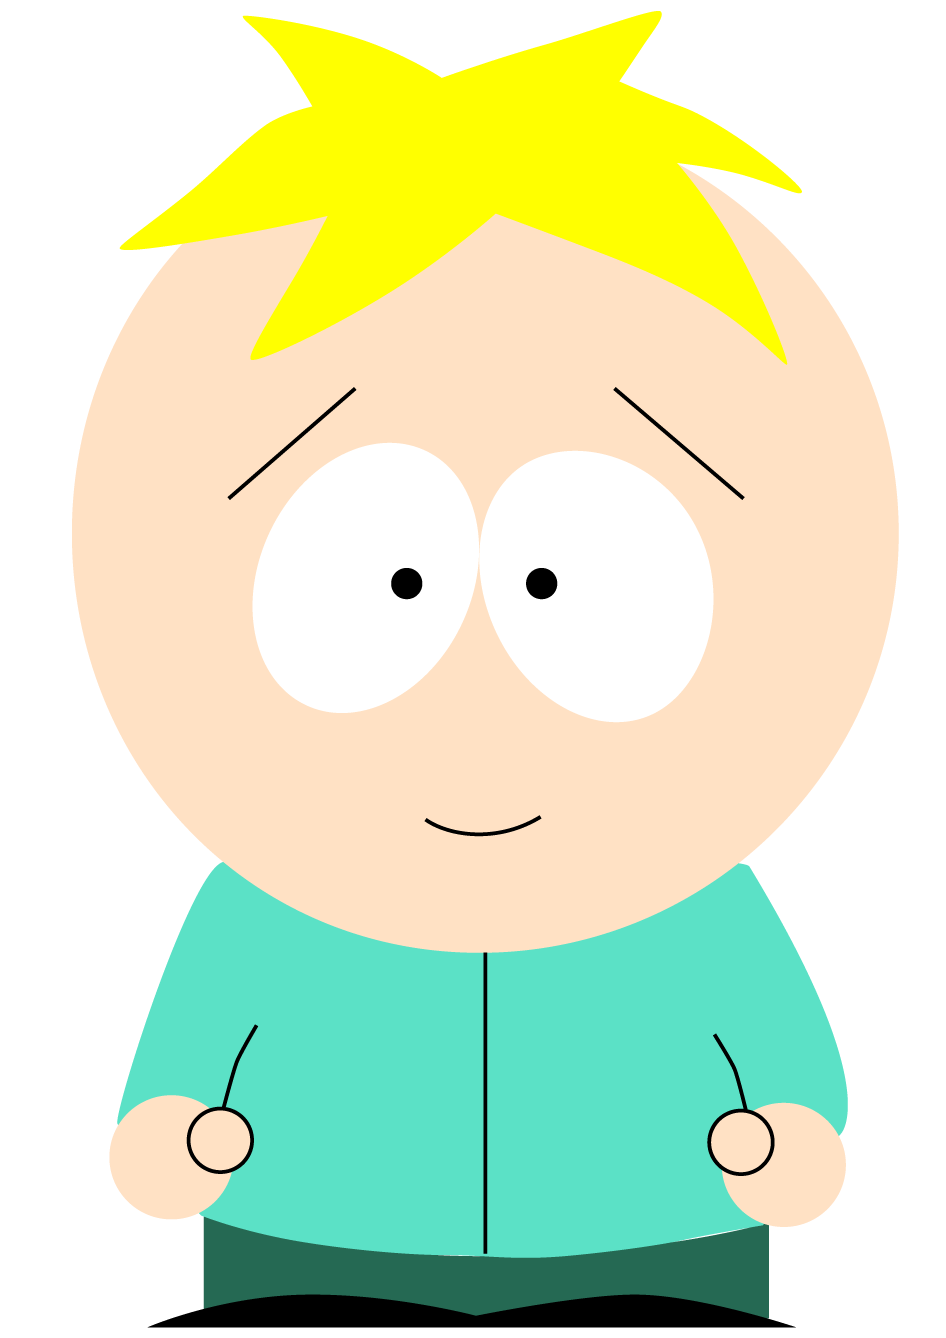 Butters South Park by jonathanhher on DeviantArt